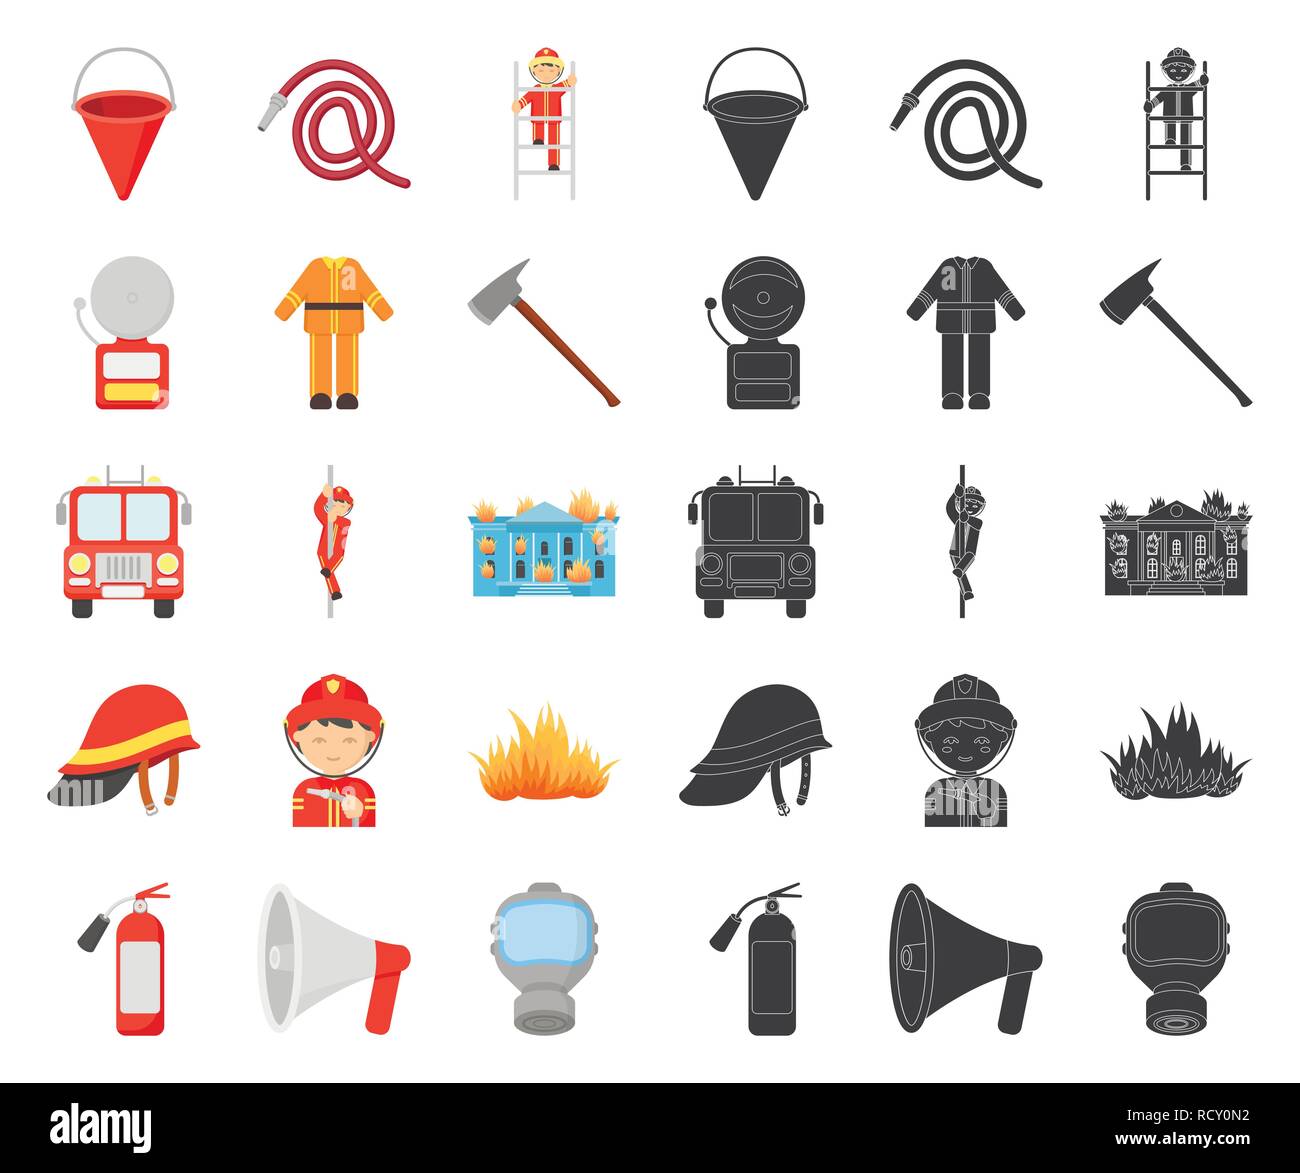 accessories,apparatus,art,attribute,axe,bucket,building,bunker,cartoon,black,collection,conical,department,design,equipment,extinguishing,extingushier,fire,firefighter,firefighting,flame,gas,gear,helmet,icon,illustration,isolated,logo,mask,organization,pike,pole,pump,ring,separation,service,set,sign,slide,symbol,tools,vector,web Vector Vectors , Stock Vector